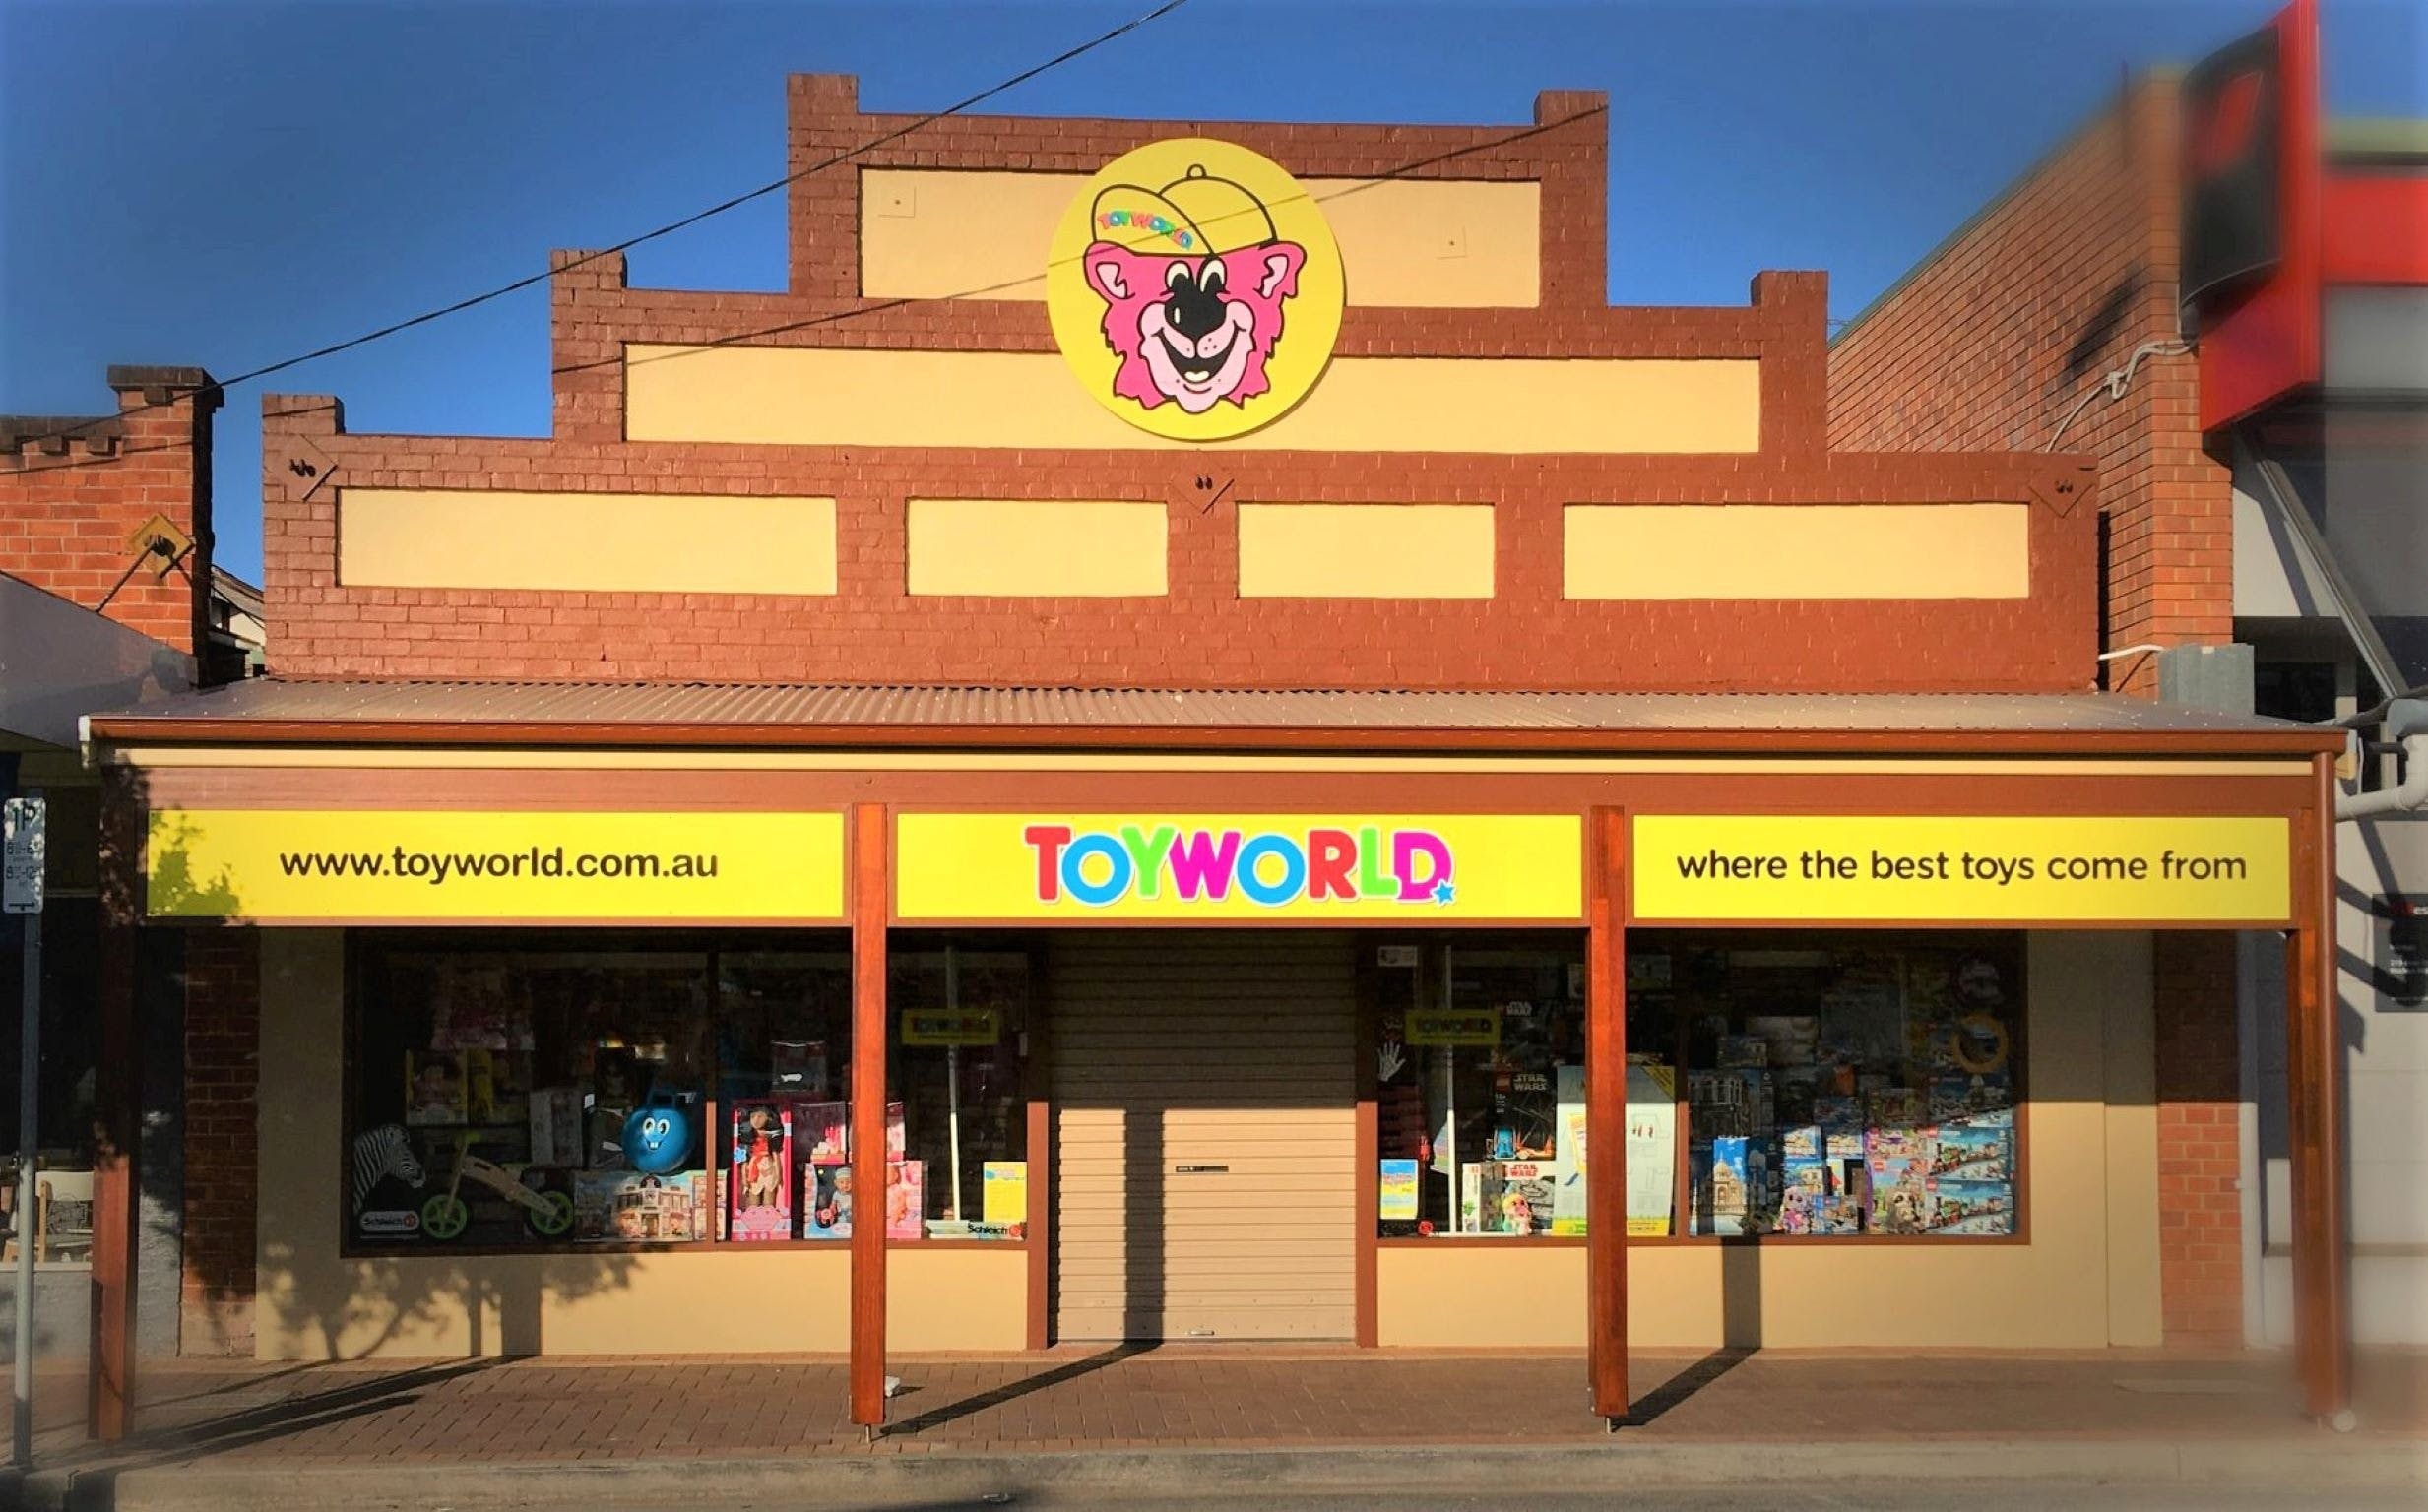 TOY WORLD - TOY WORLD is the best Toy Shop out there in